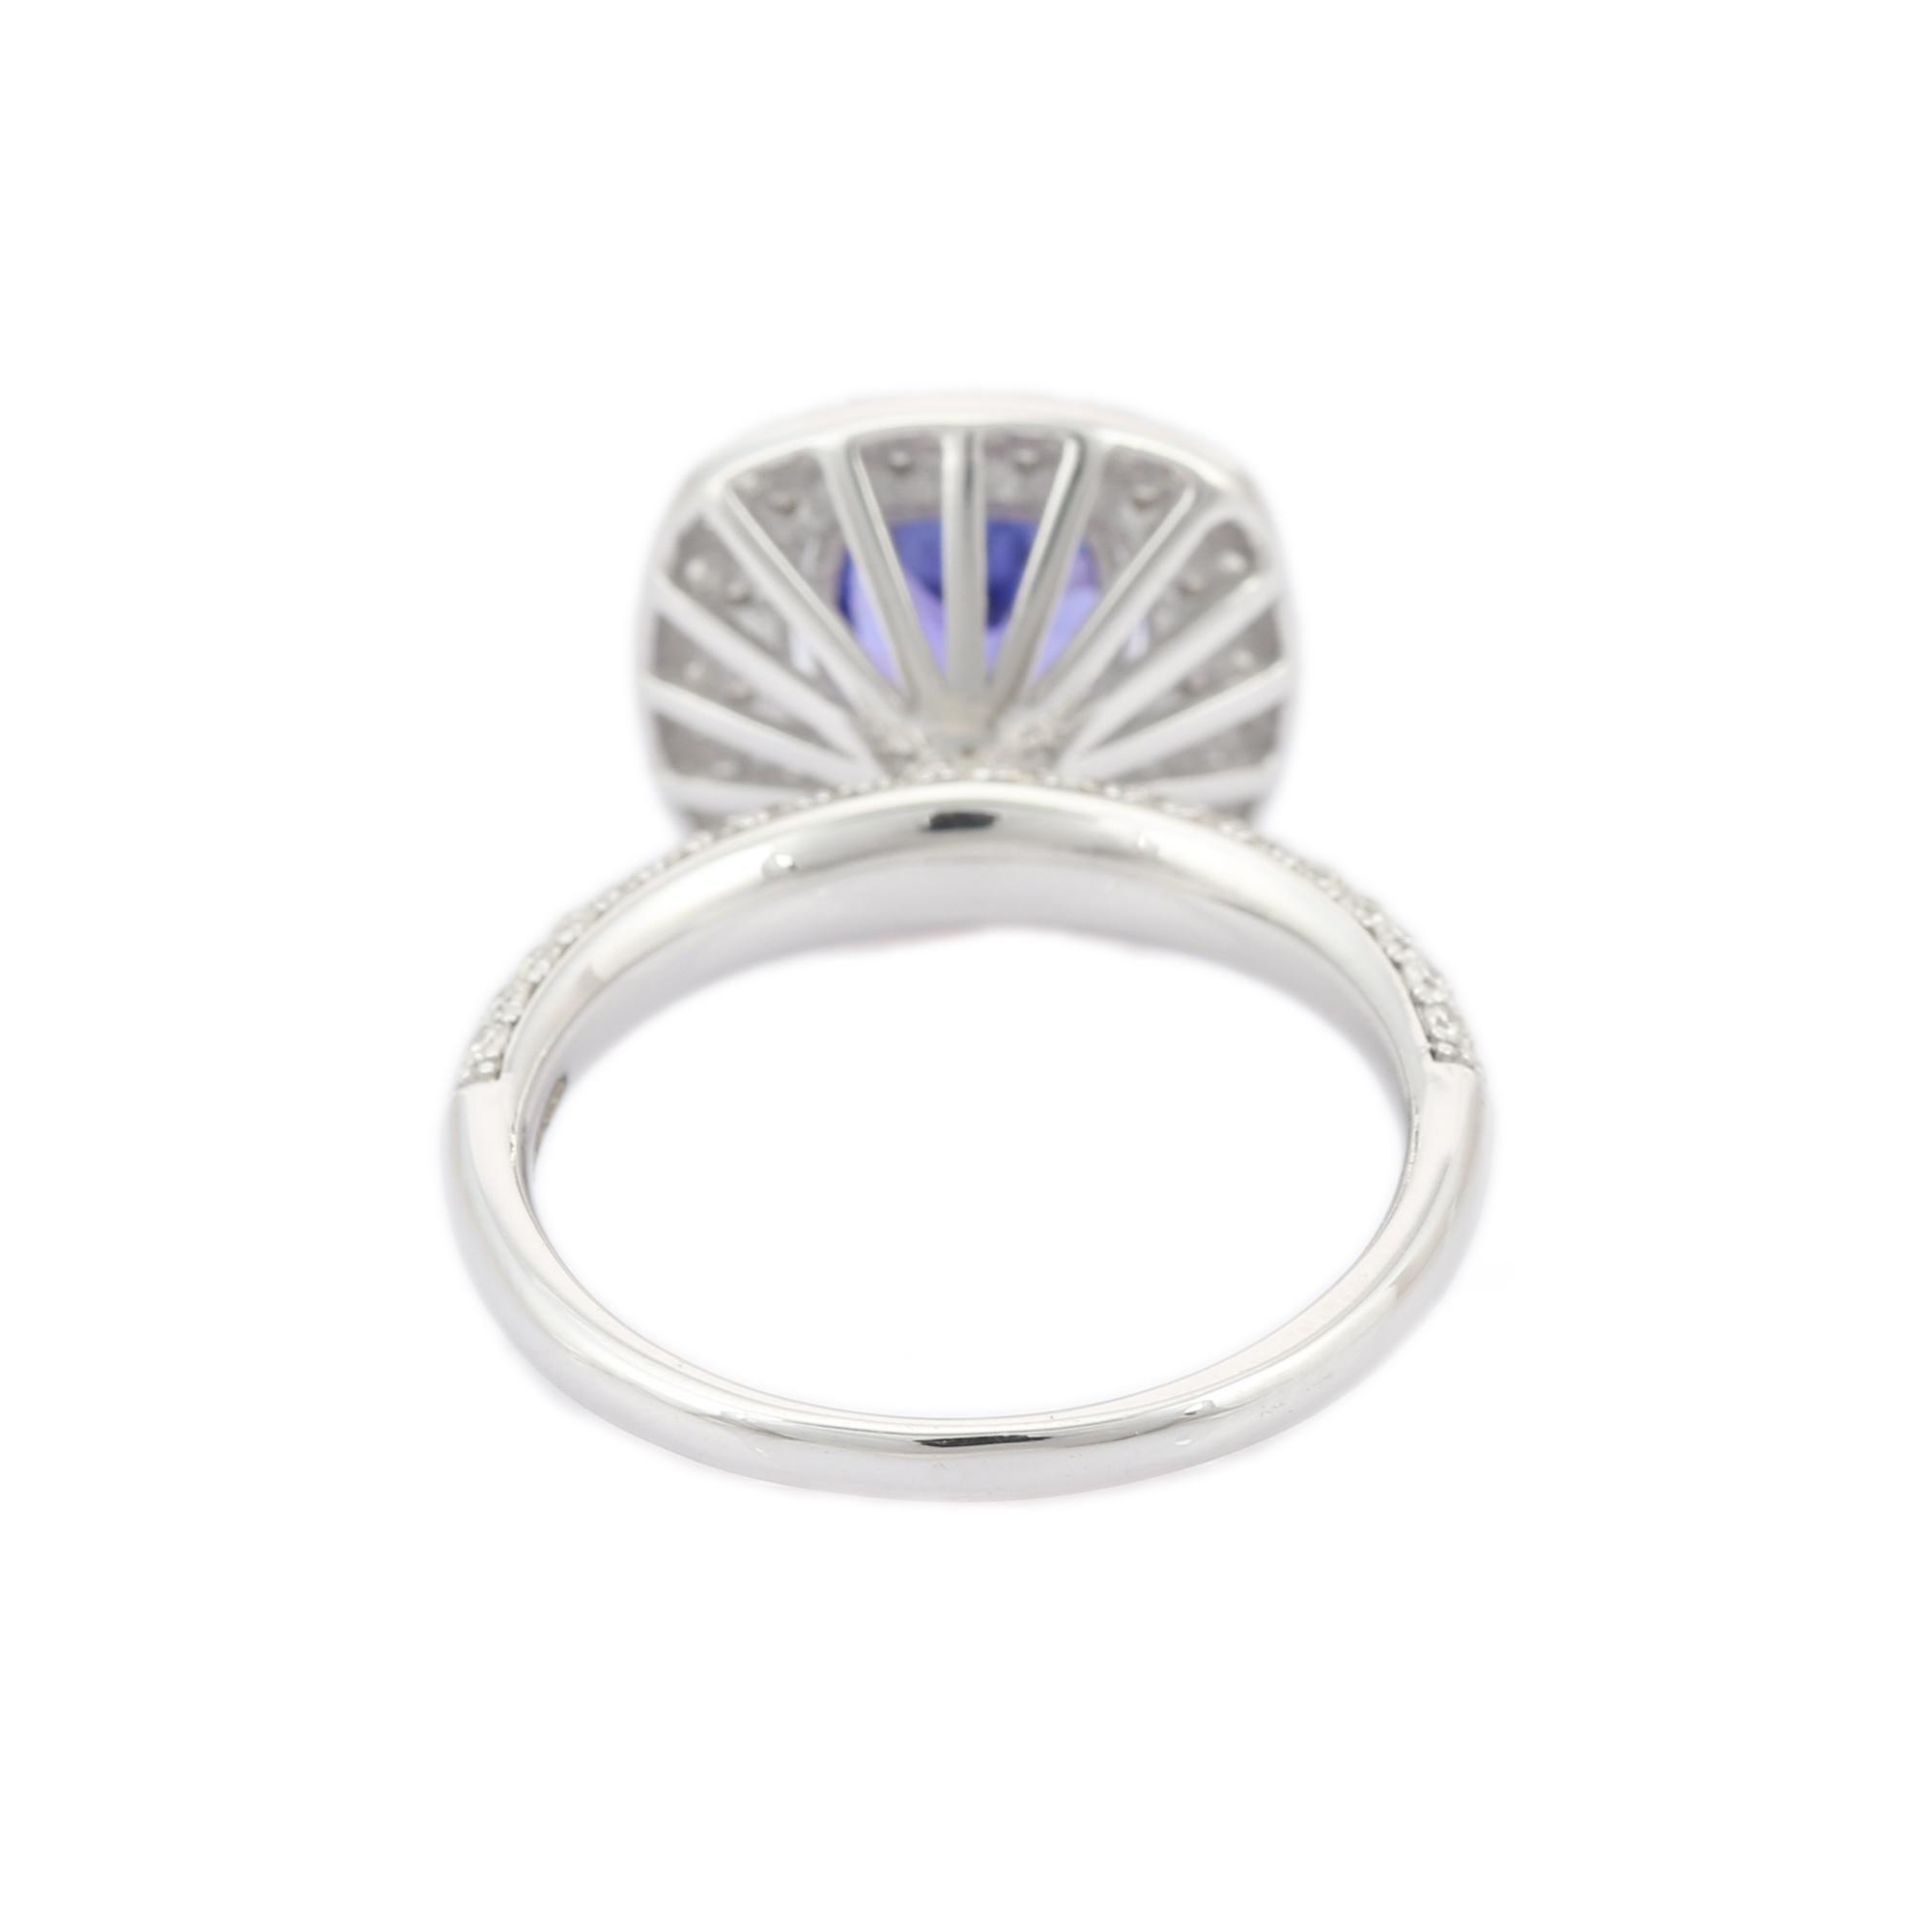 For Sale:  Tanzanite Gemstone Engagement Ring with Diamonds in 18K White Gold 5